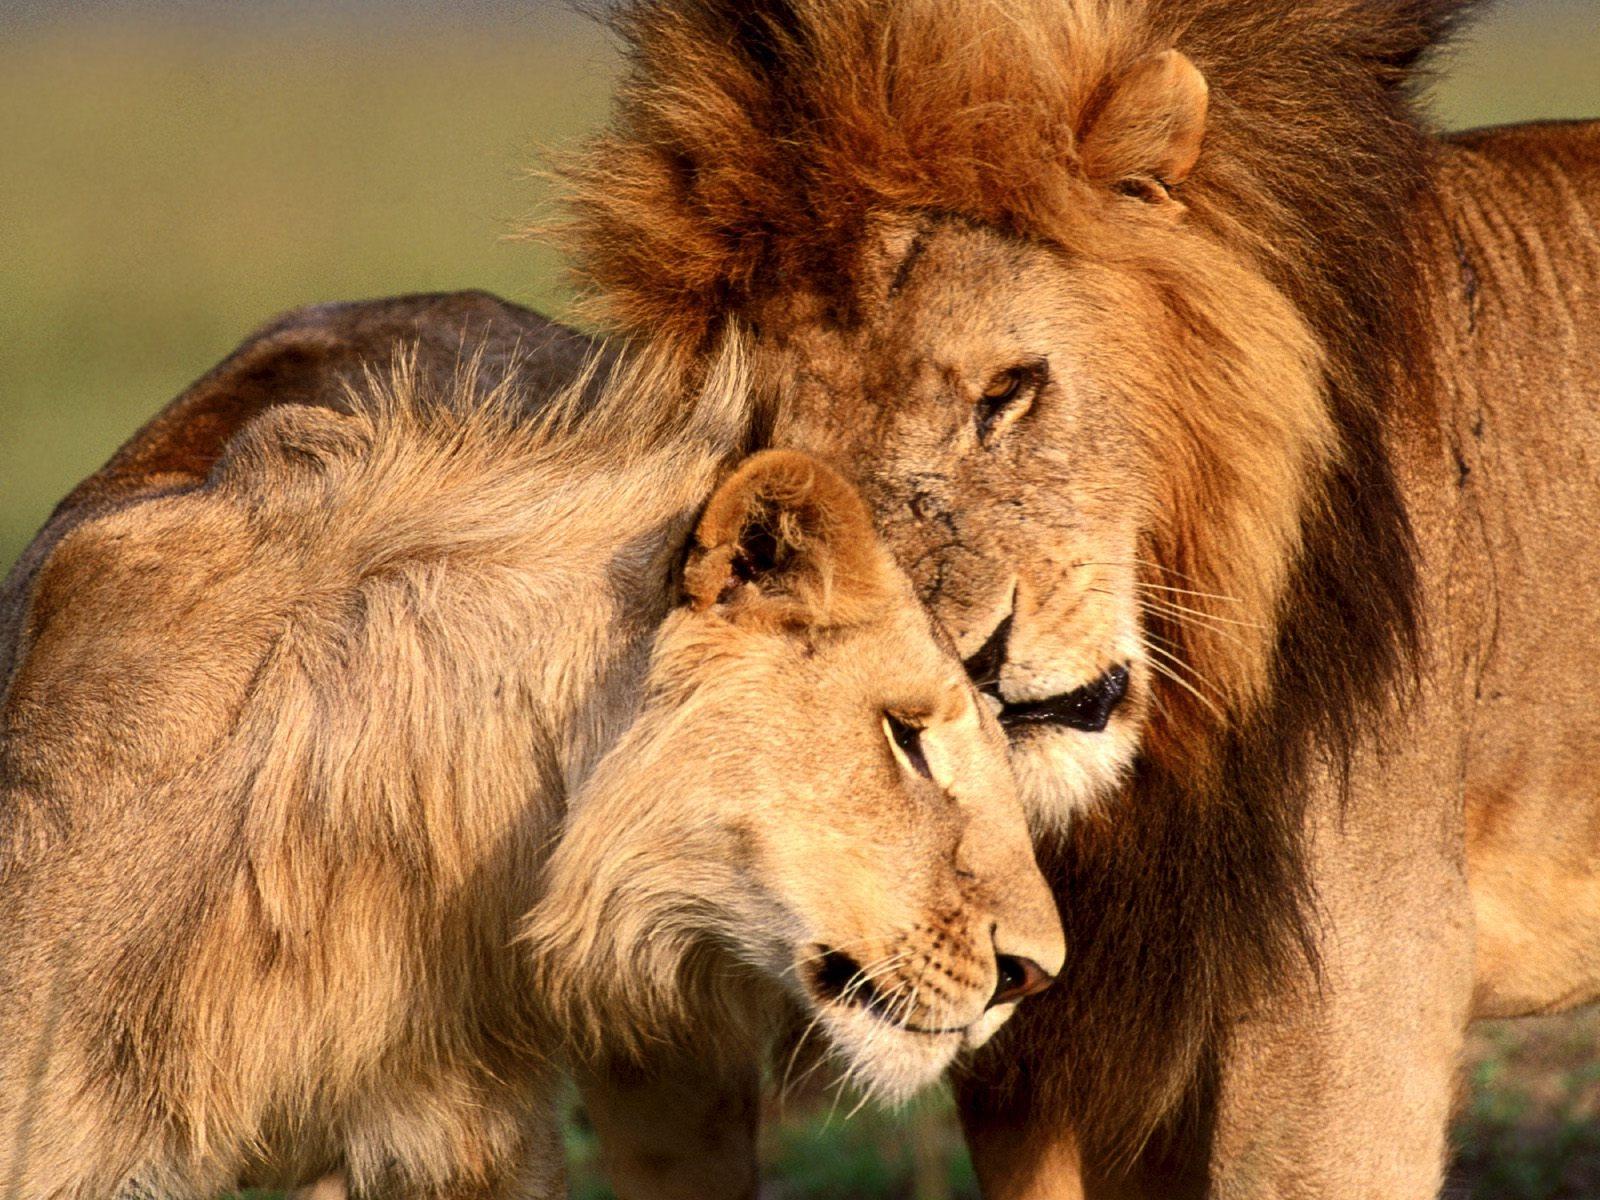 Hd Pic Of Lion And Lioness Horse and Lion Photo